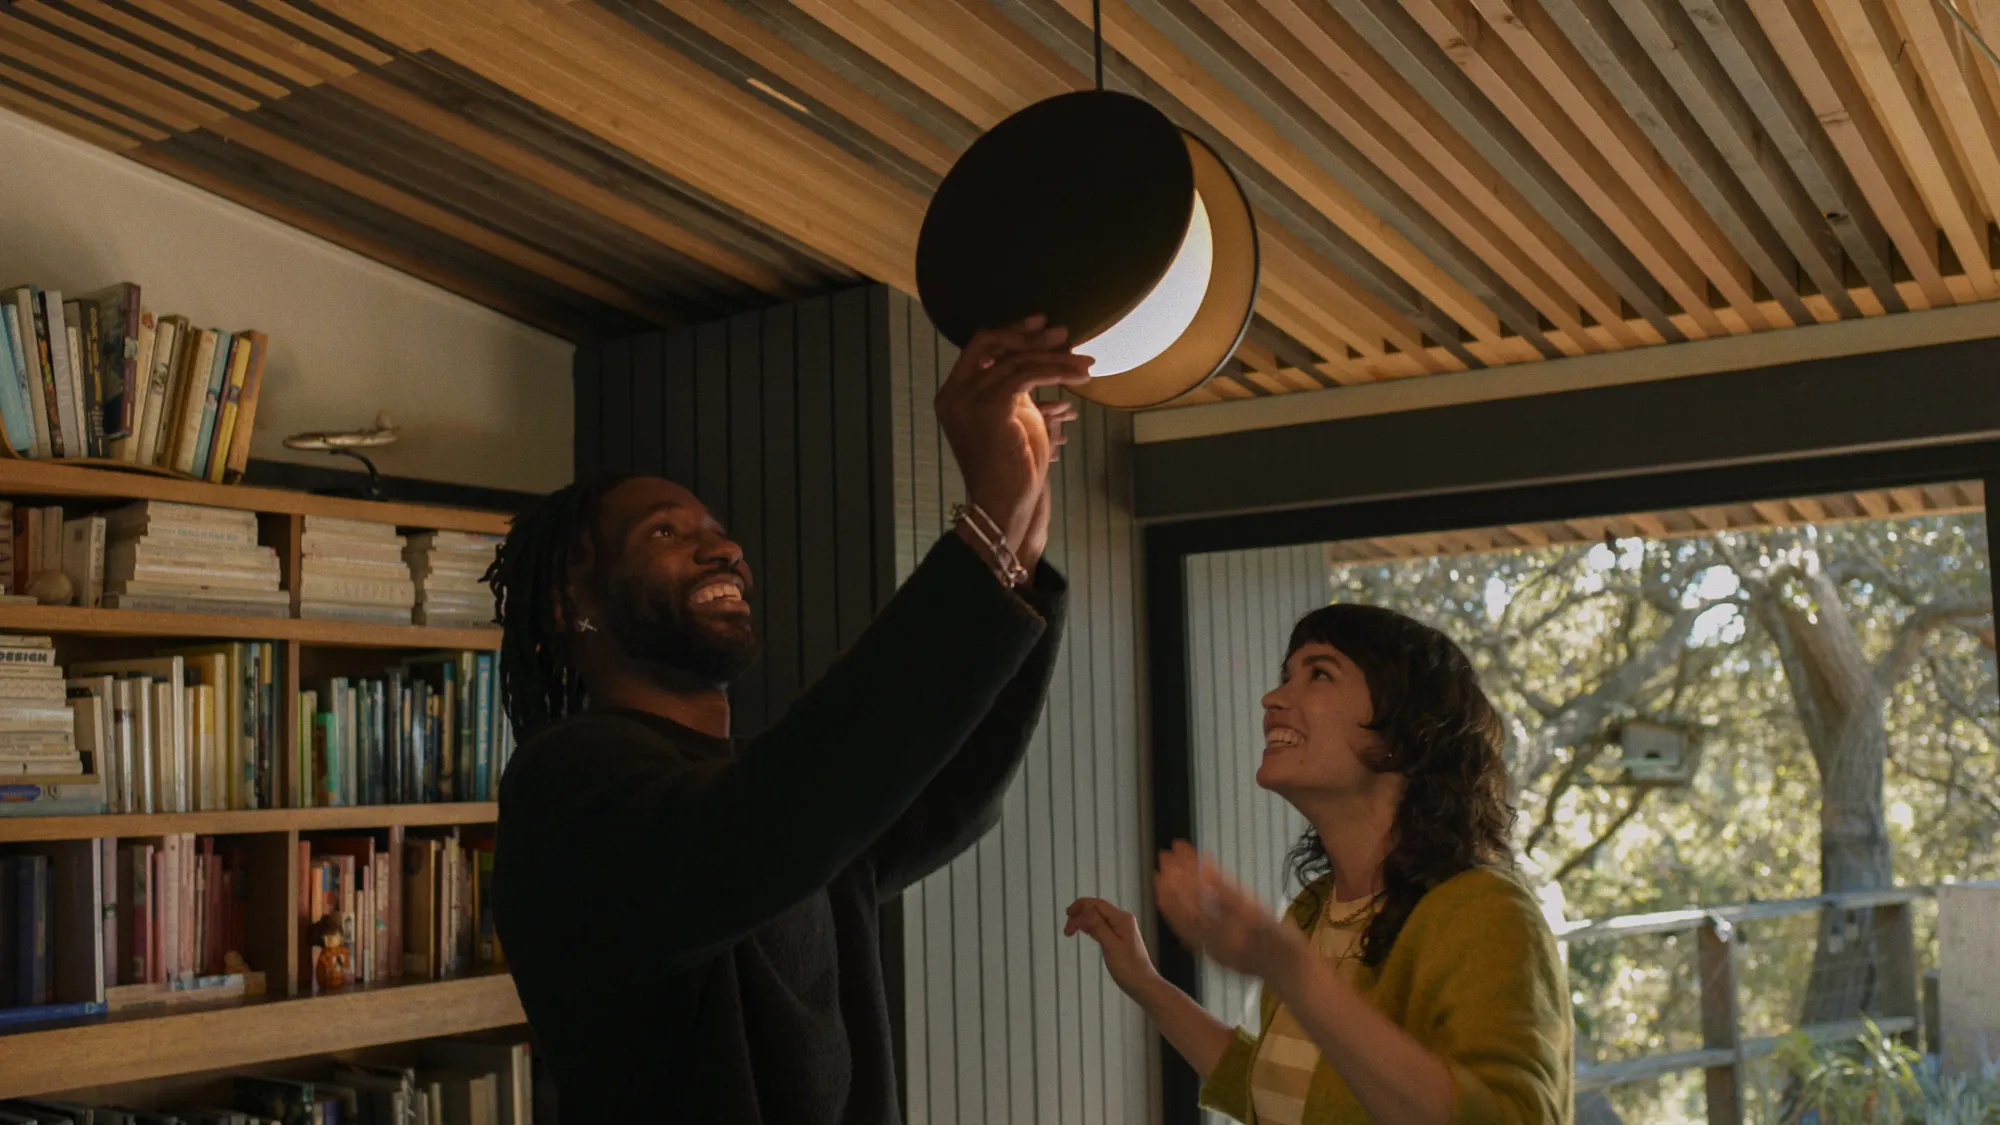 While smiling, a man is fixing his chosen ceiling light with his hands. A woman is also smiling while she looks at their chosen lighting for their space.